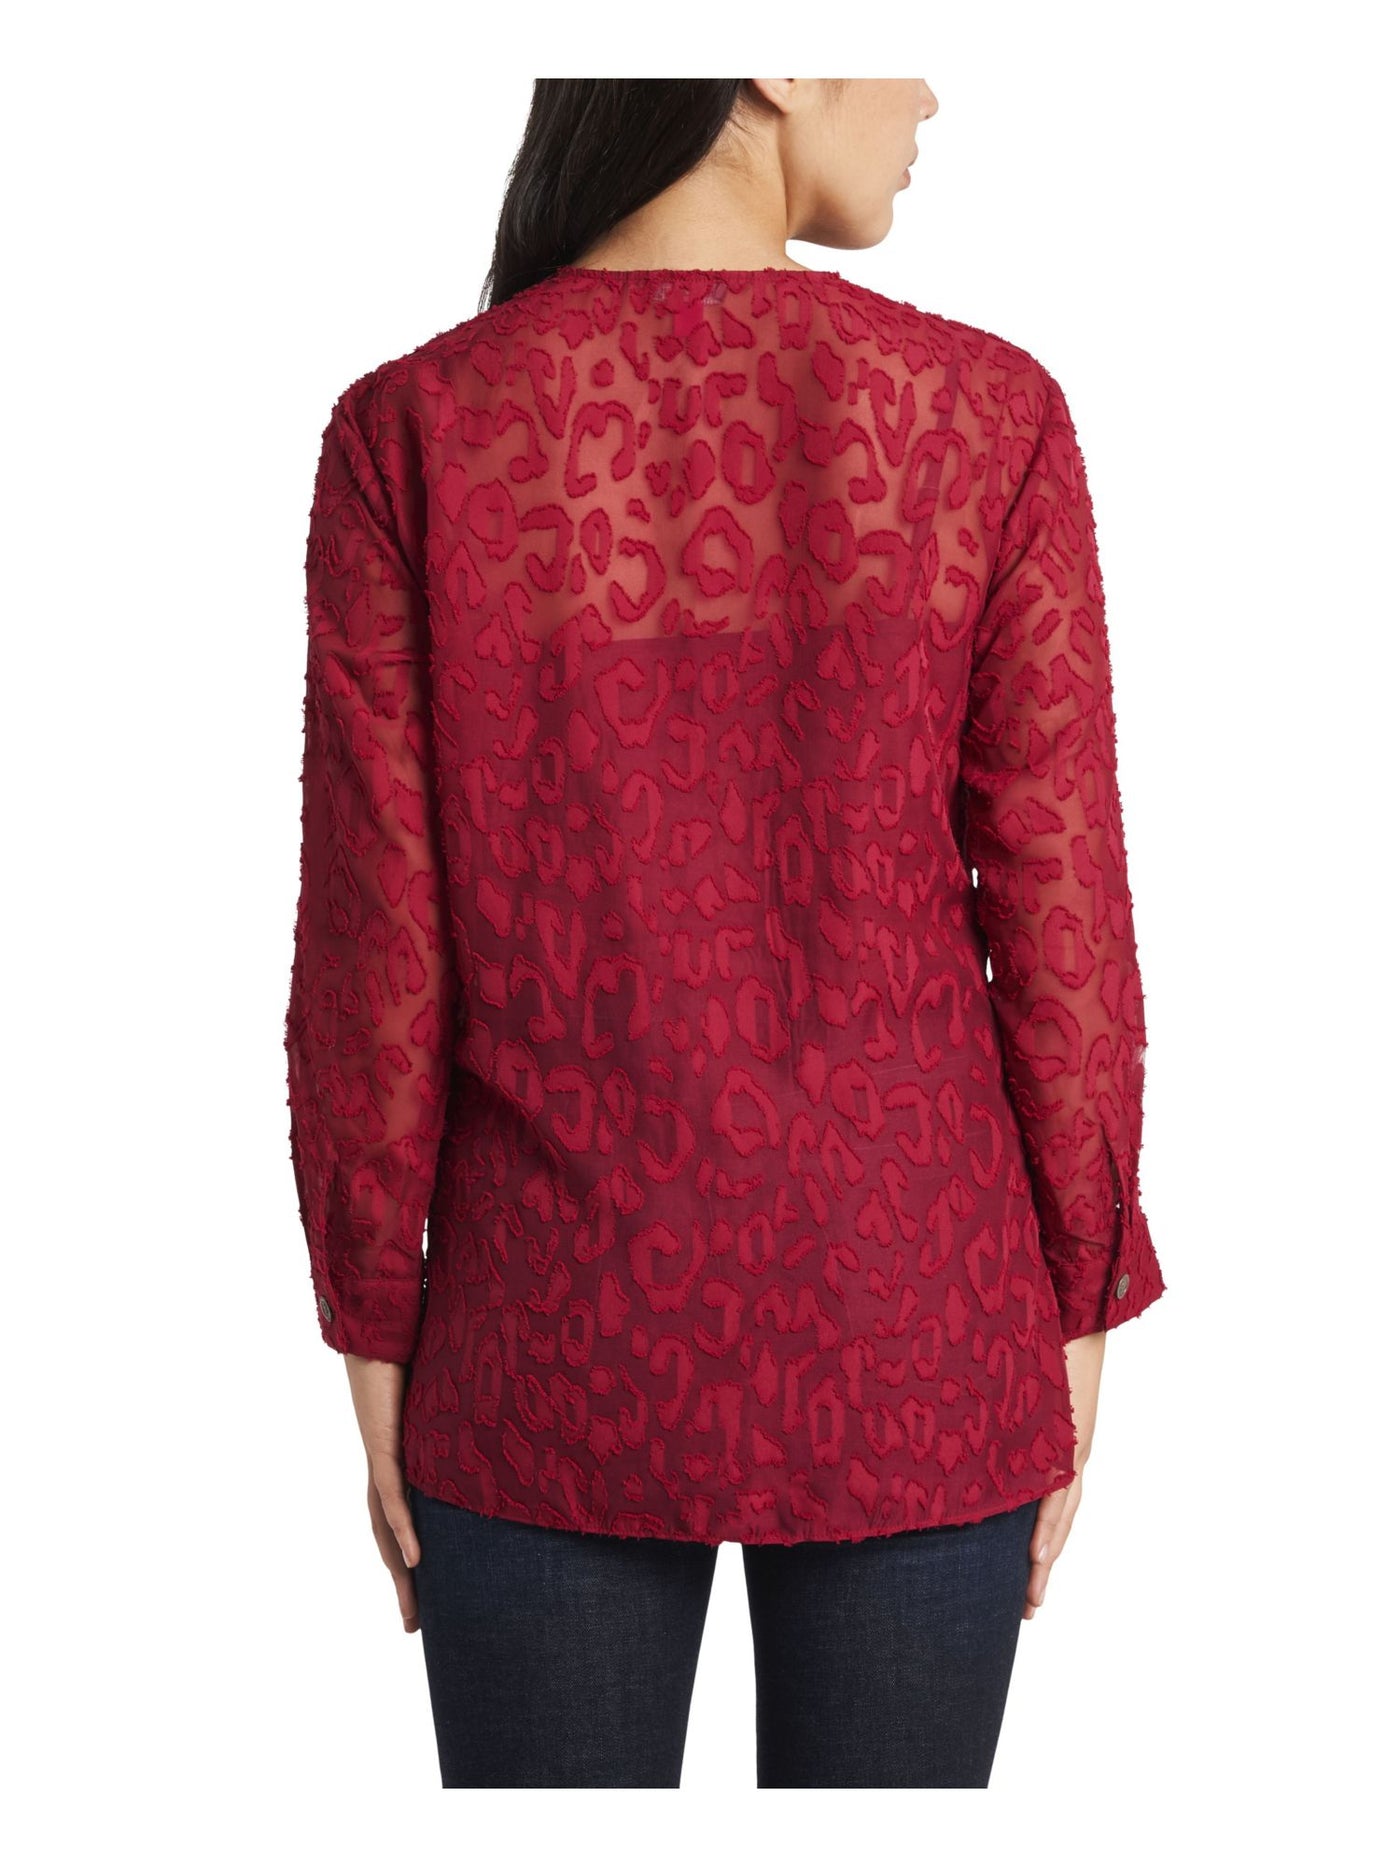 VINCE CAMUTO Womens Red Unlined Sheer Long Sleeve V Neck Tunic Top S